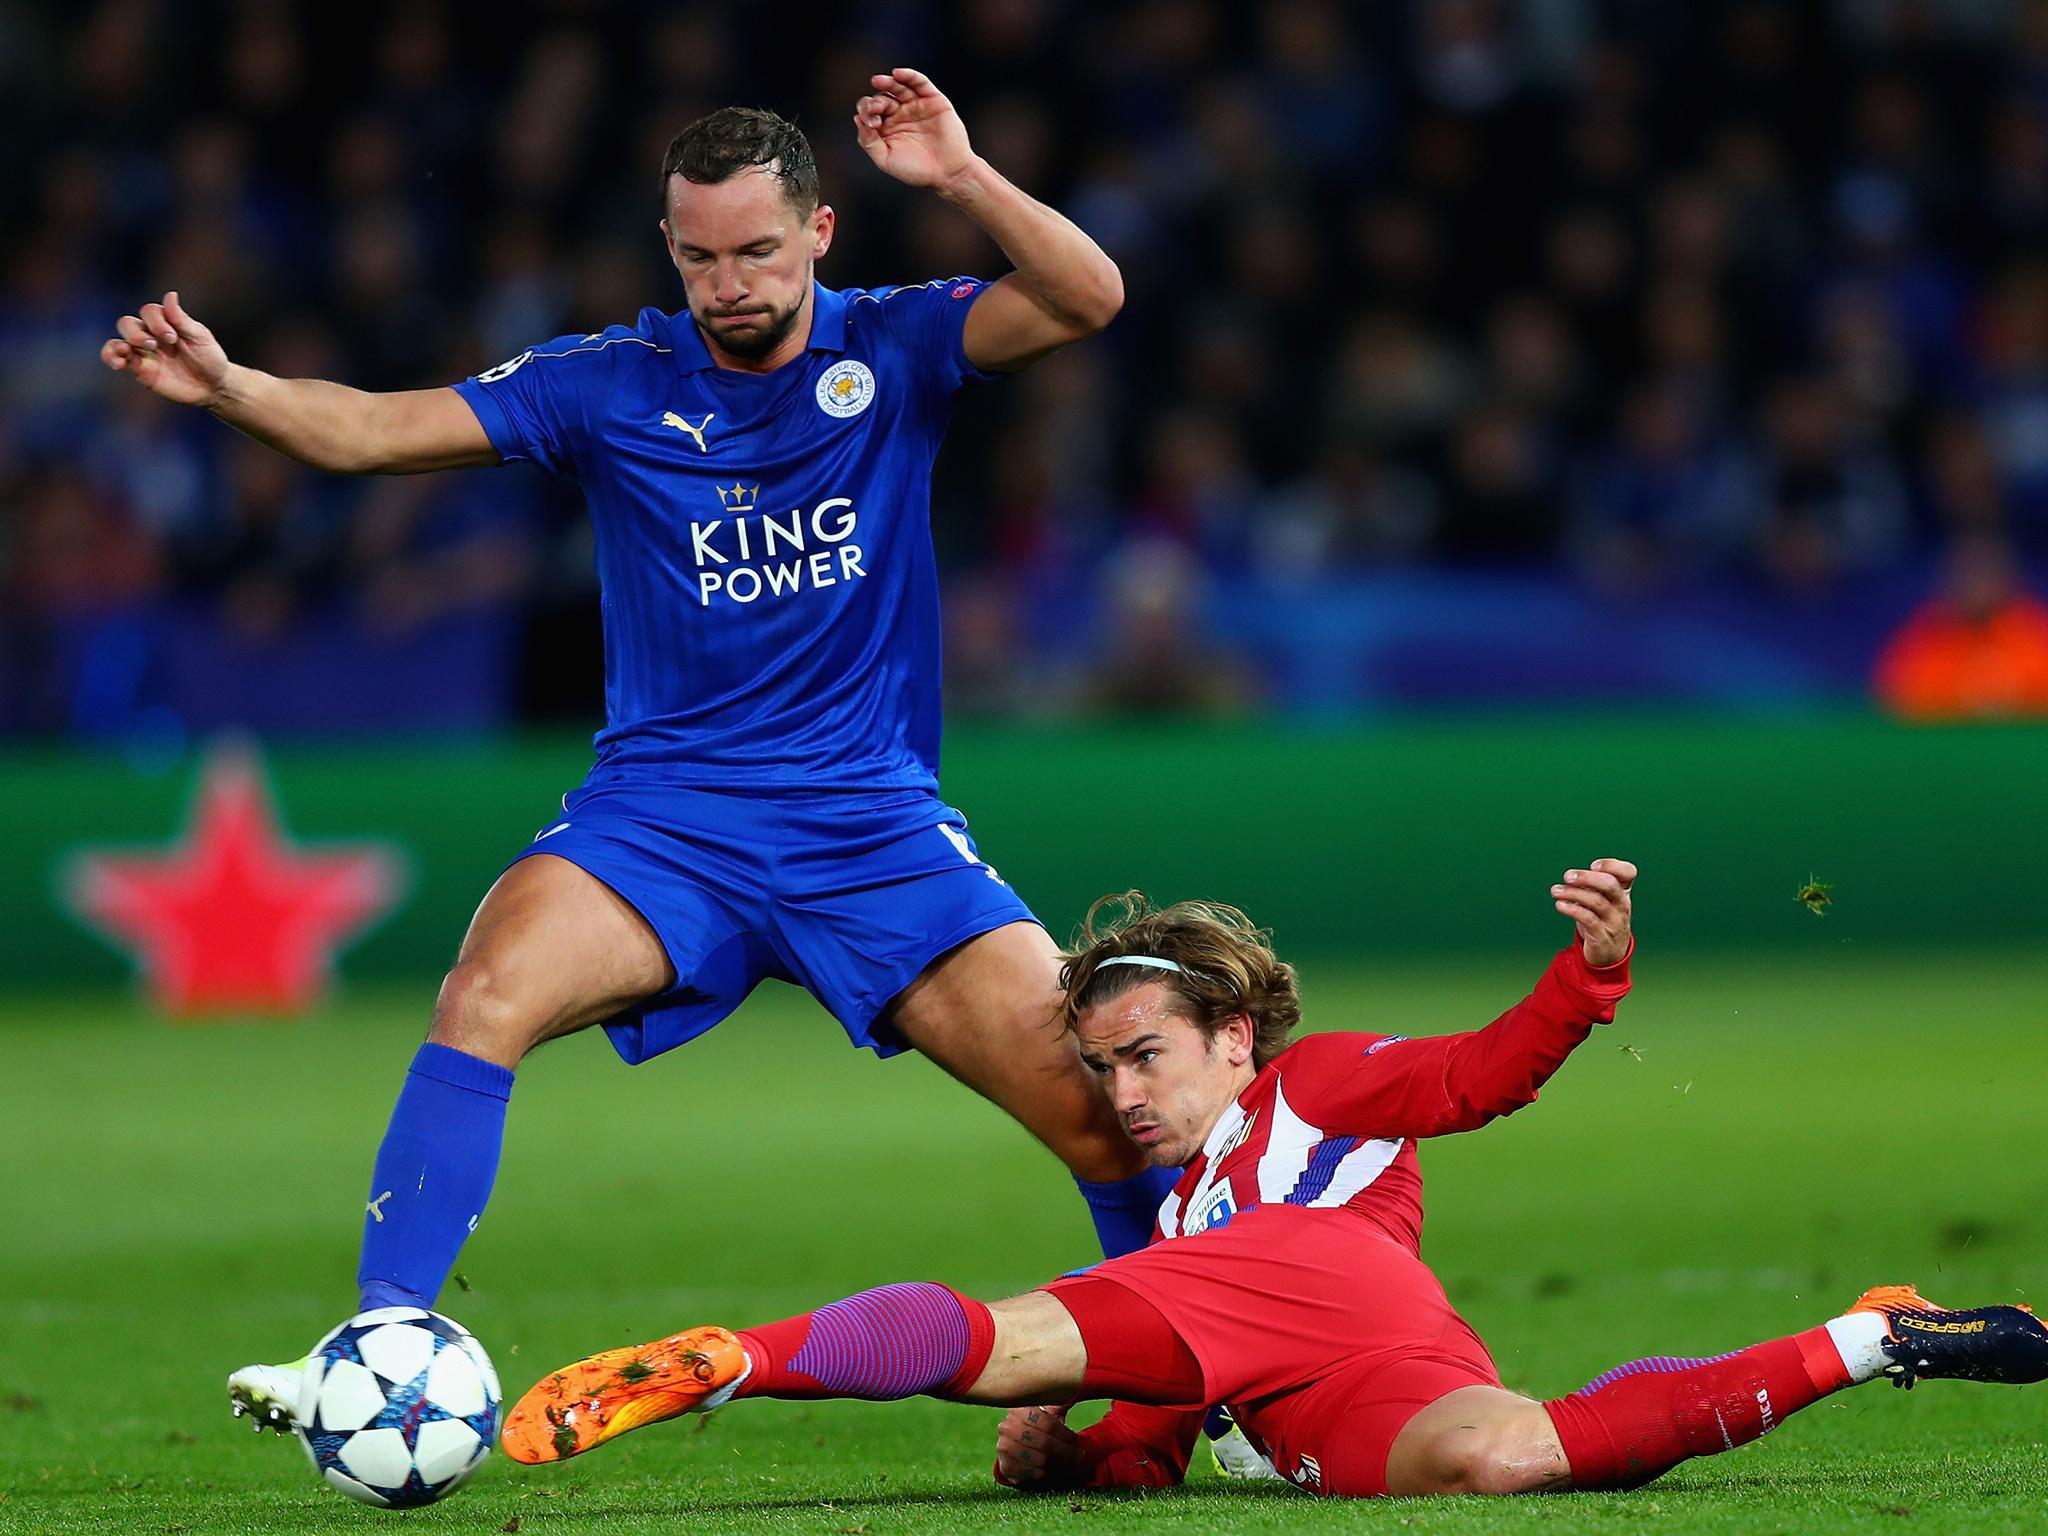 Drinkwater signed for Chelsea after a long delay (Getty)